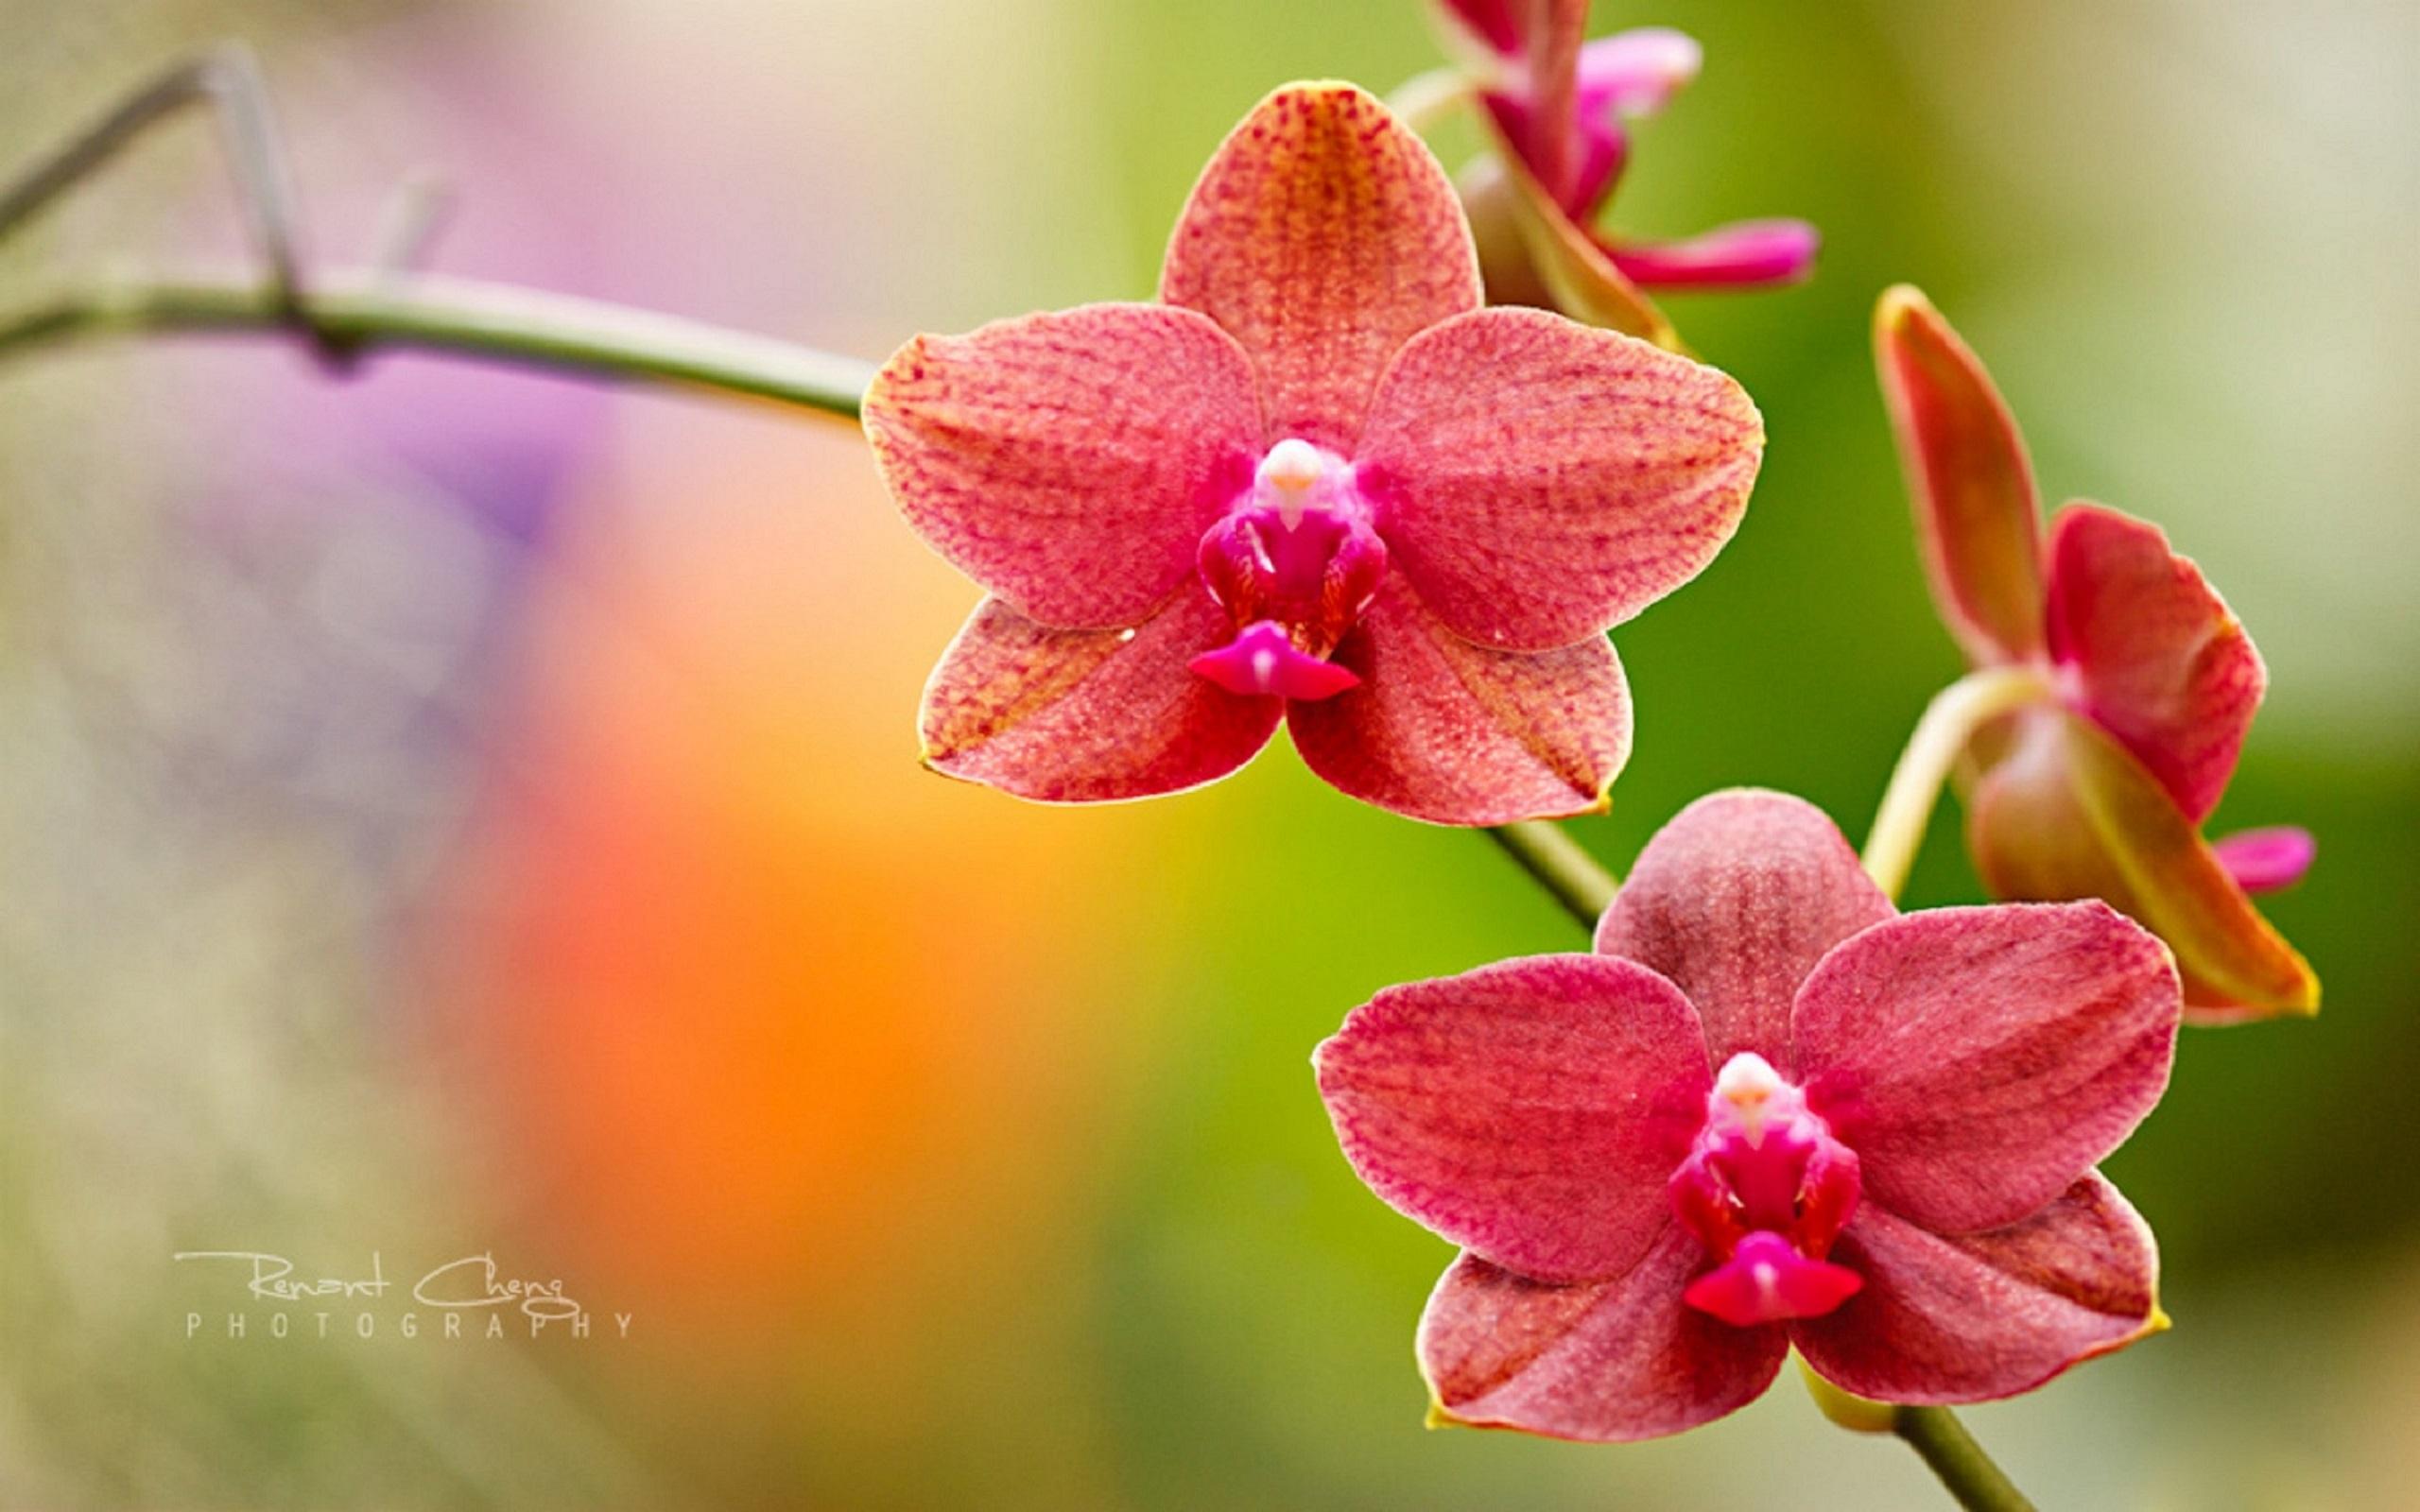 The Orchids of Display HD Wallpaper, get it now